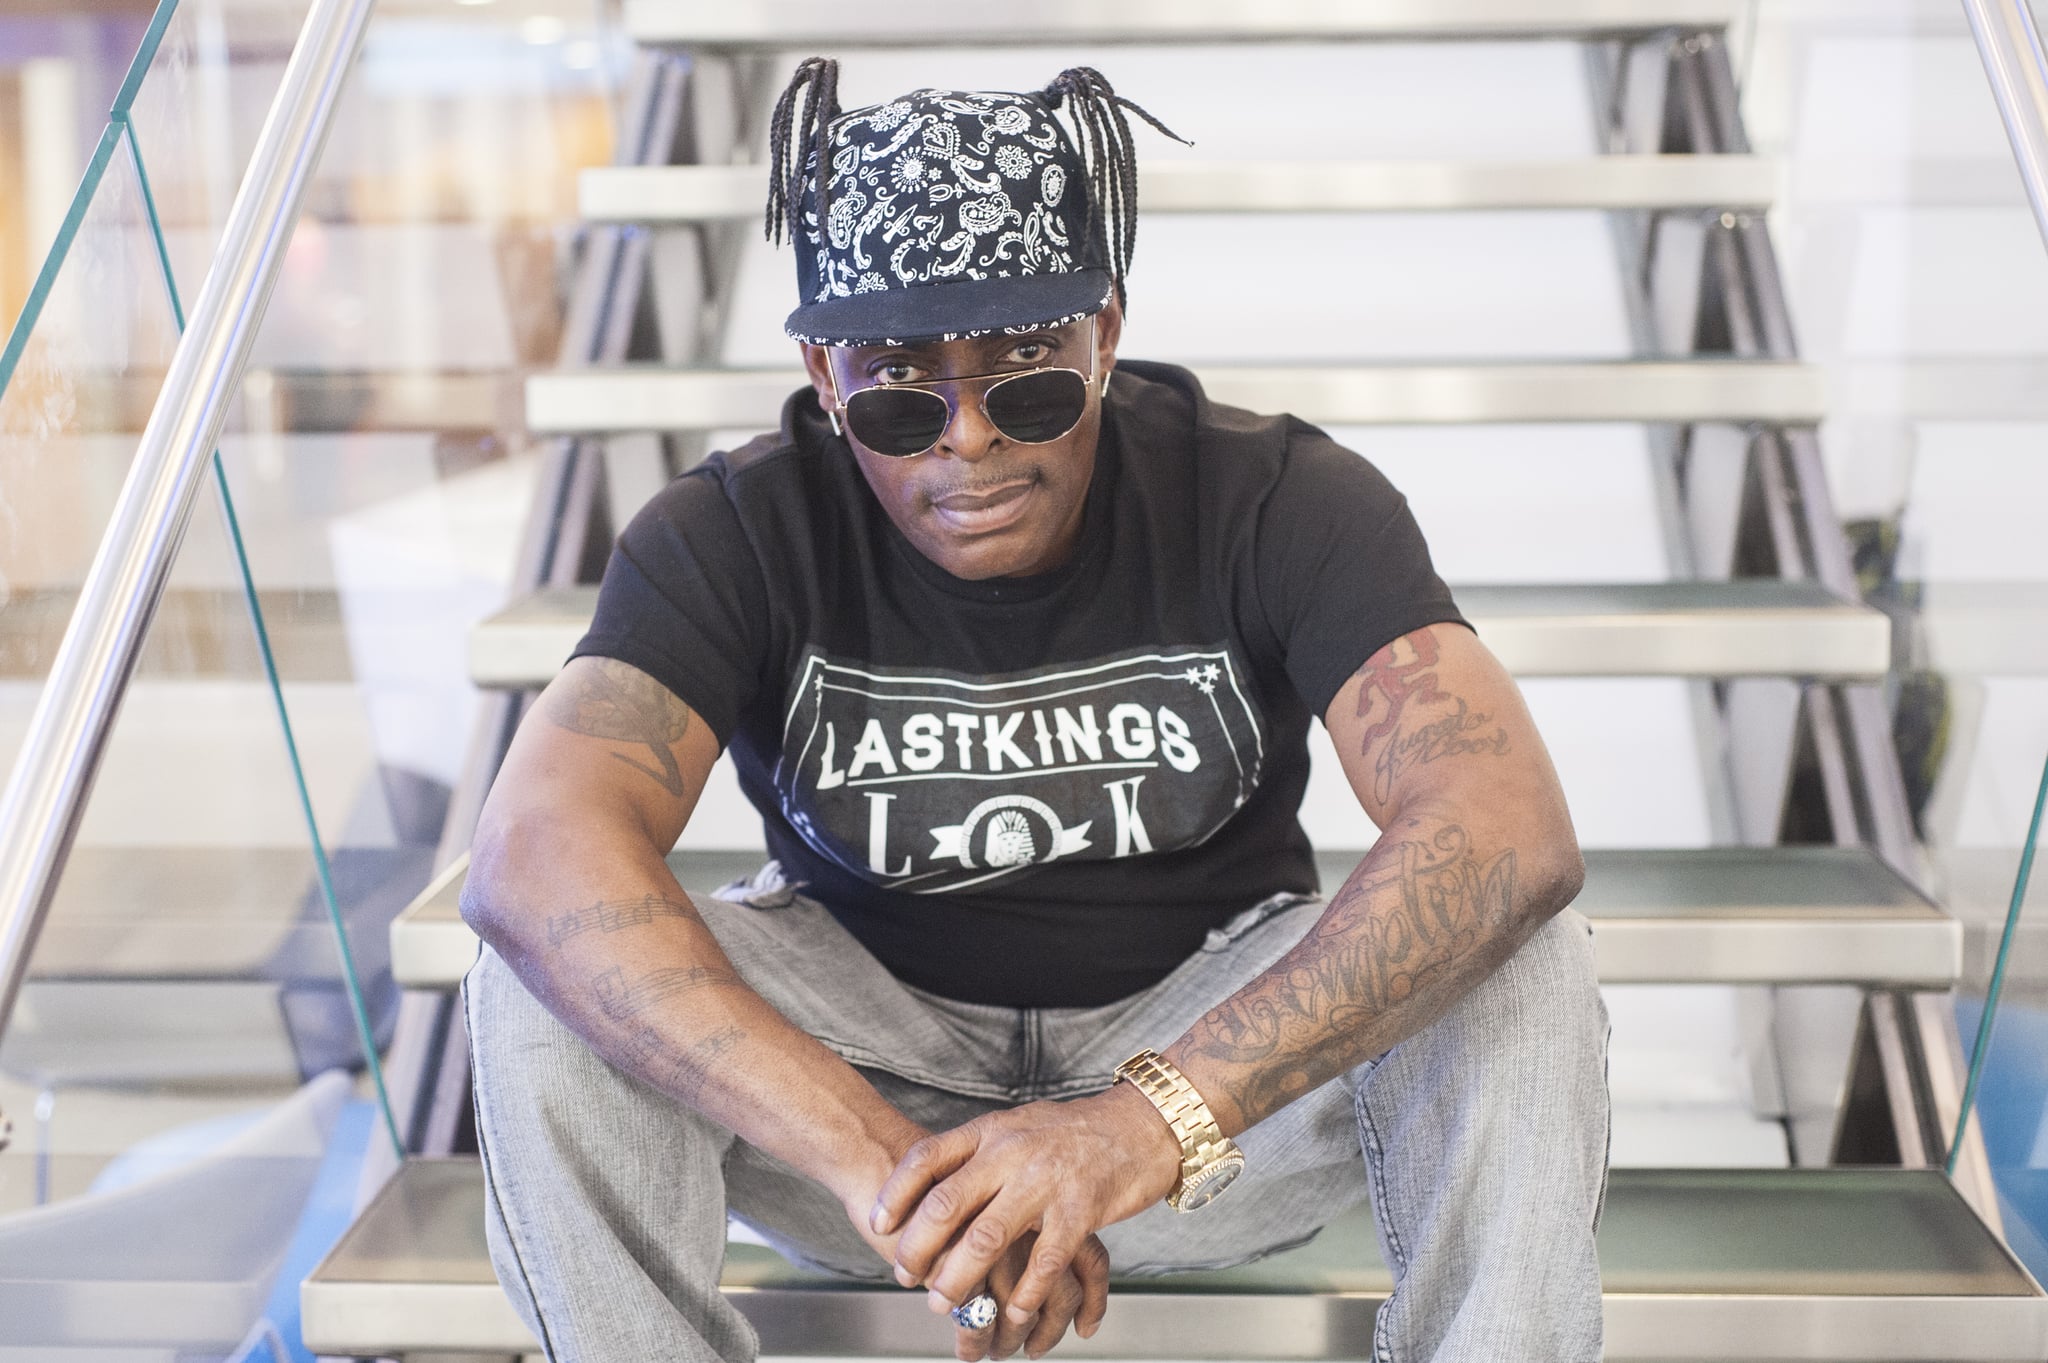 NEW YORK, NY - SEPTEMBER 10: Rapper Coolio poses for a portrait at the SiriusXM Studios on September 10, 2015 in New York City.  (Photo by Kris Connor/Getty Images)